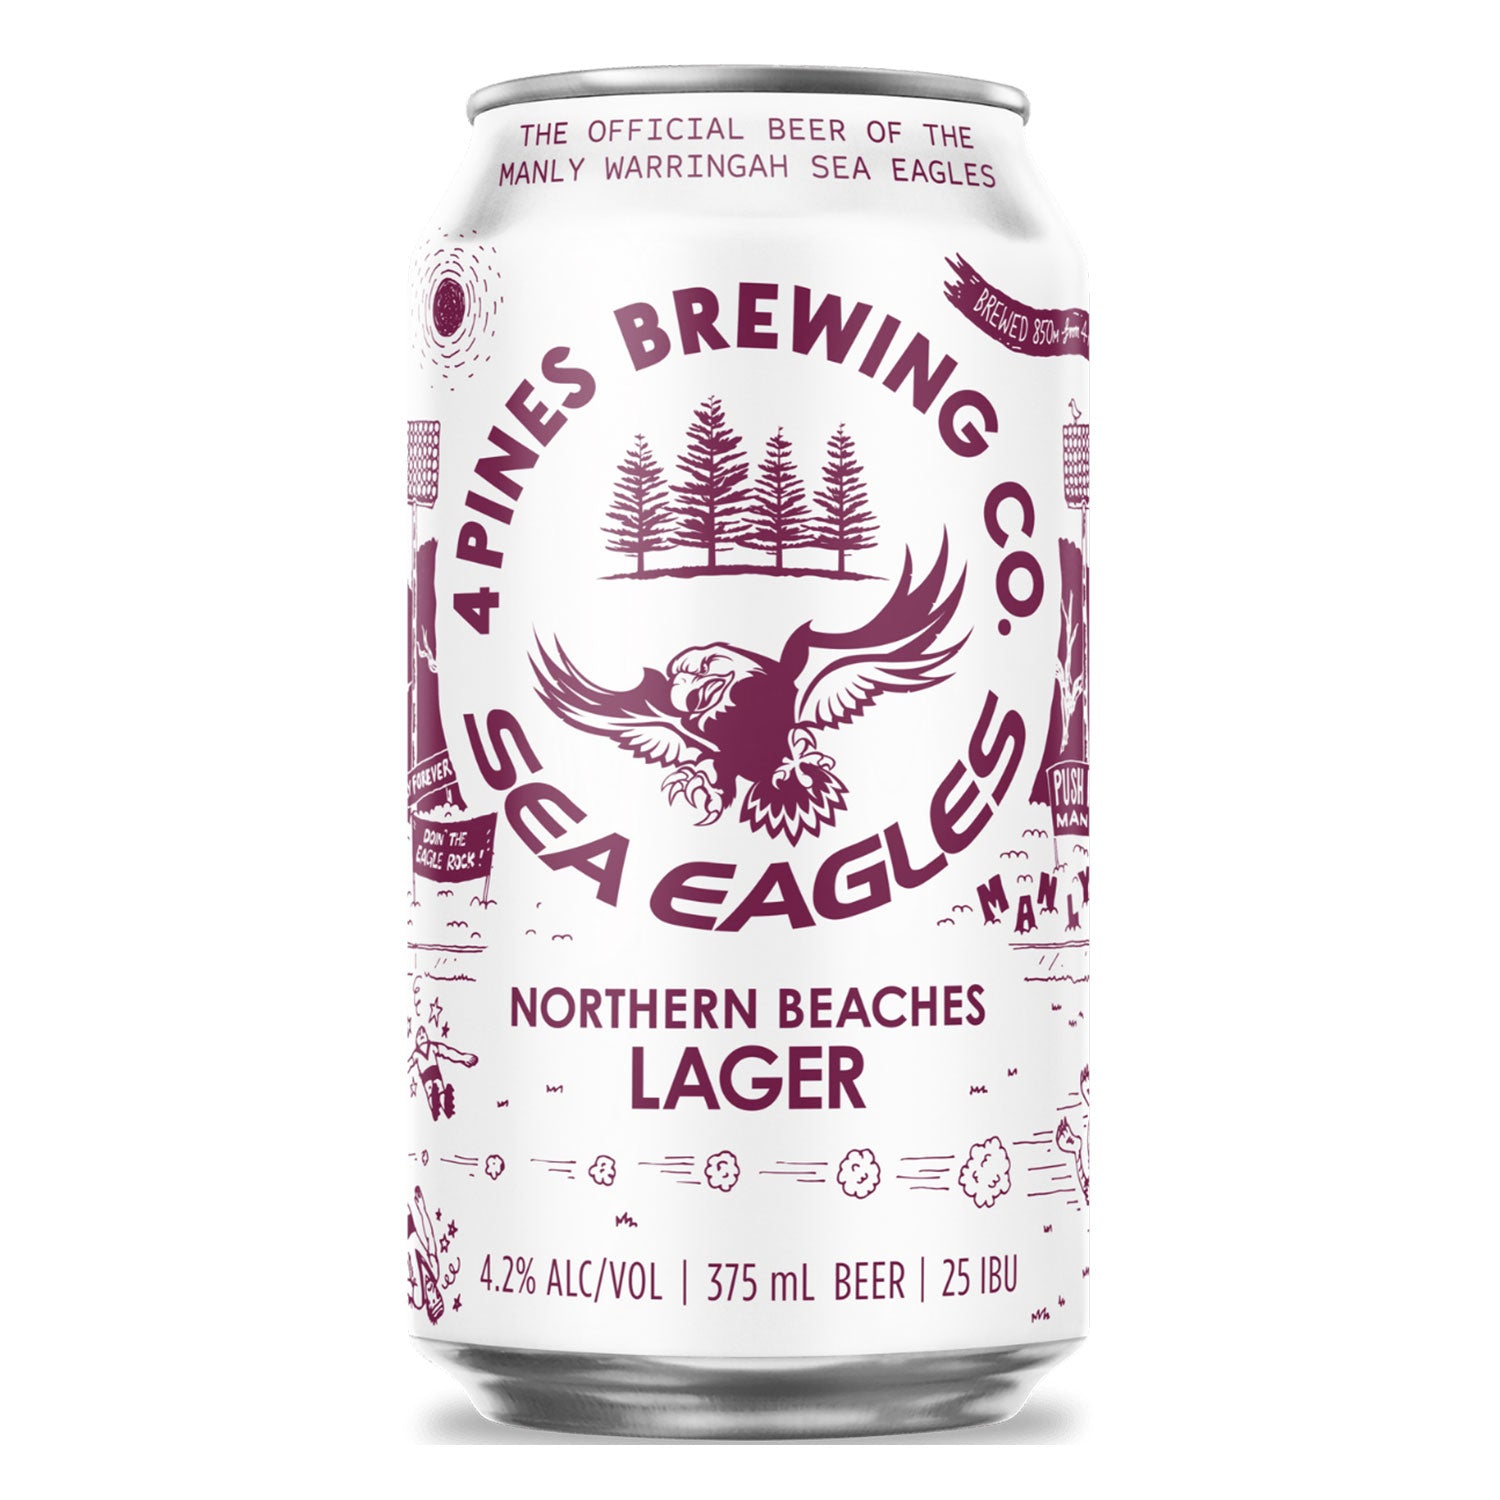 4 Pines Northern Beaches Lager (Manly Sea Eagles) 375ml